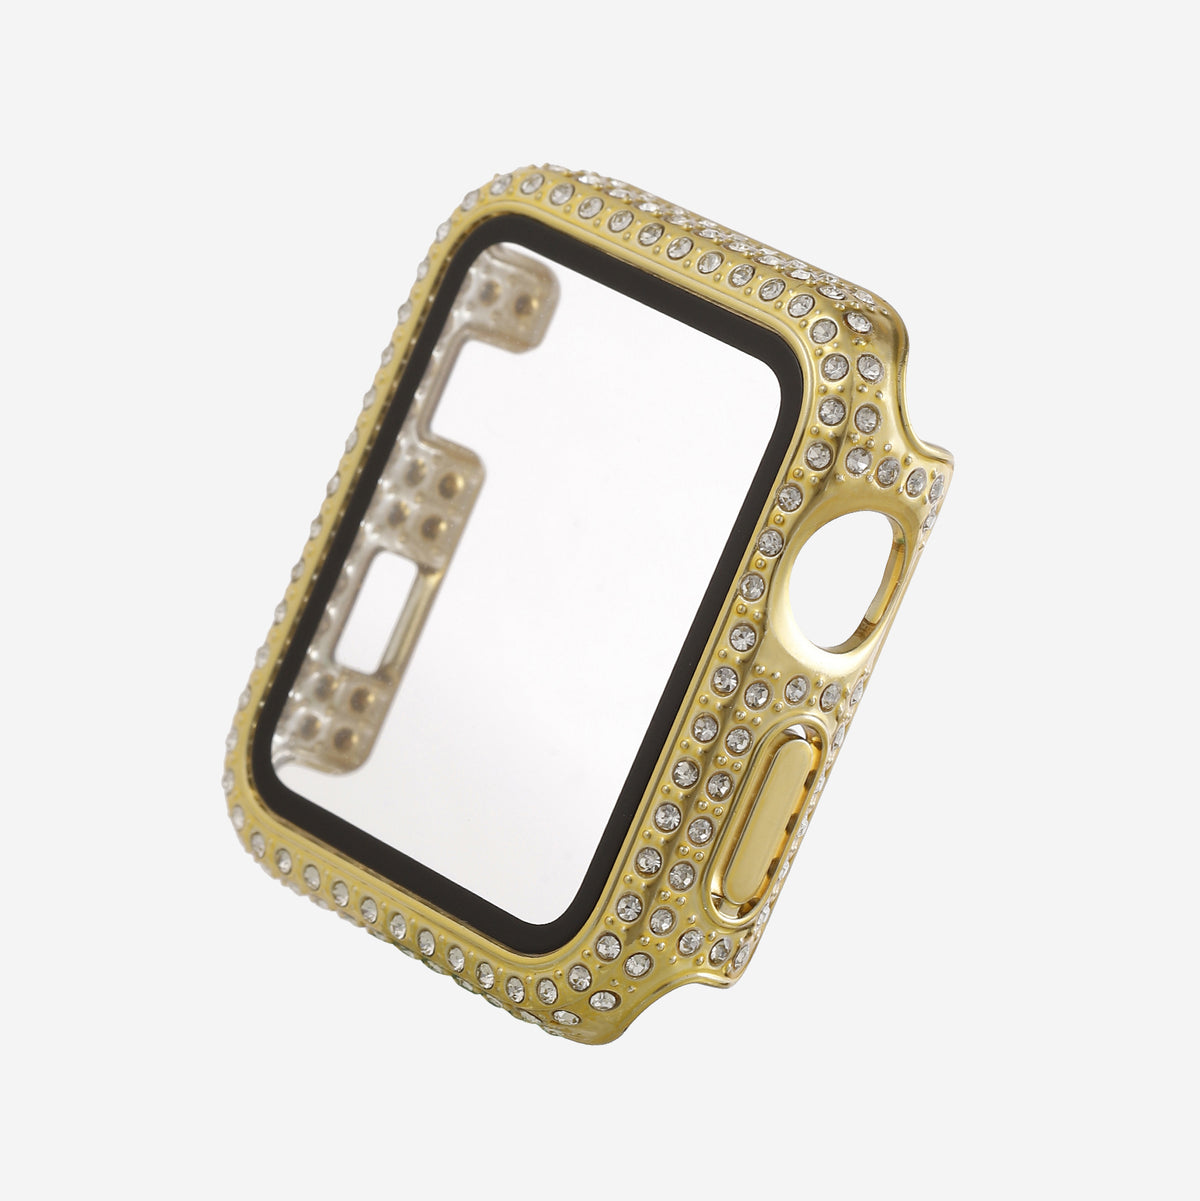 Apple Watch Crystal Screen Protector Case - Gold